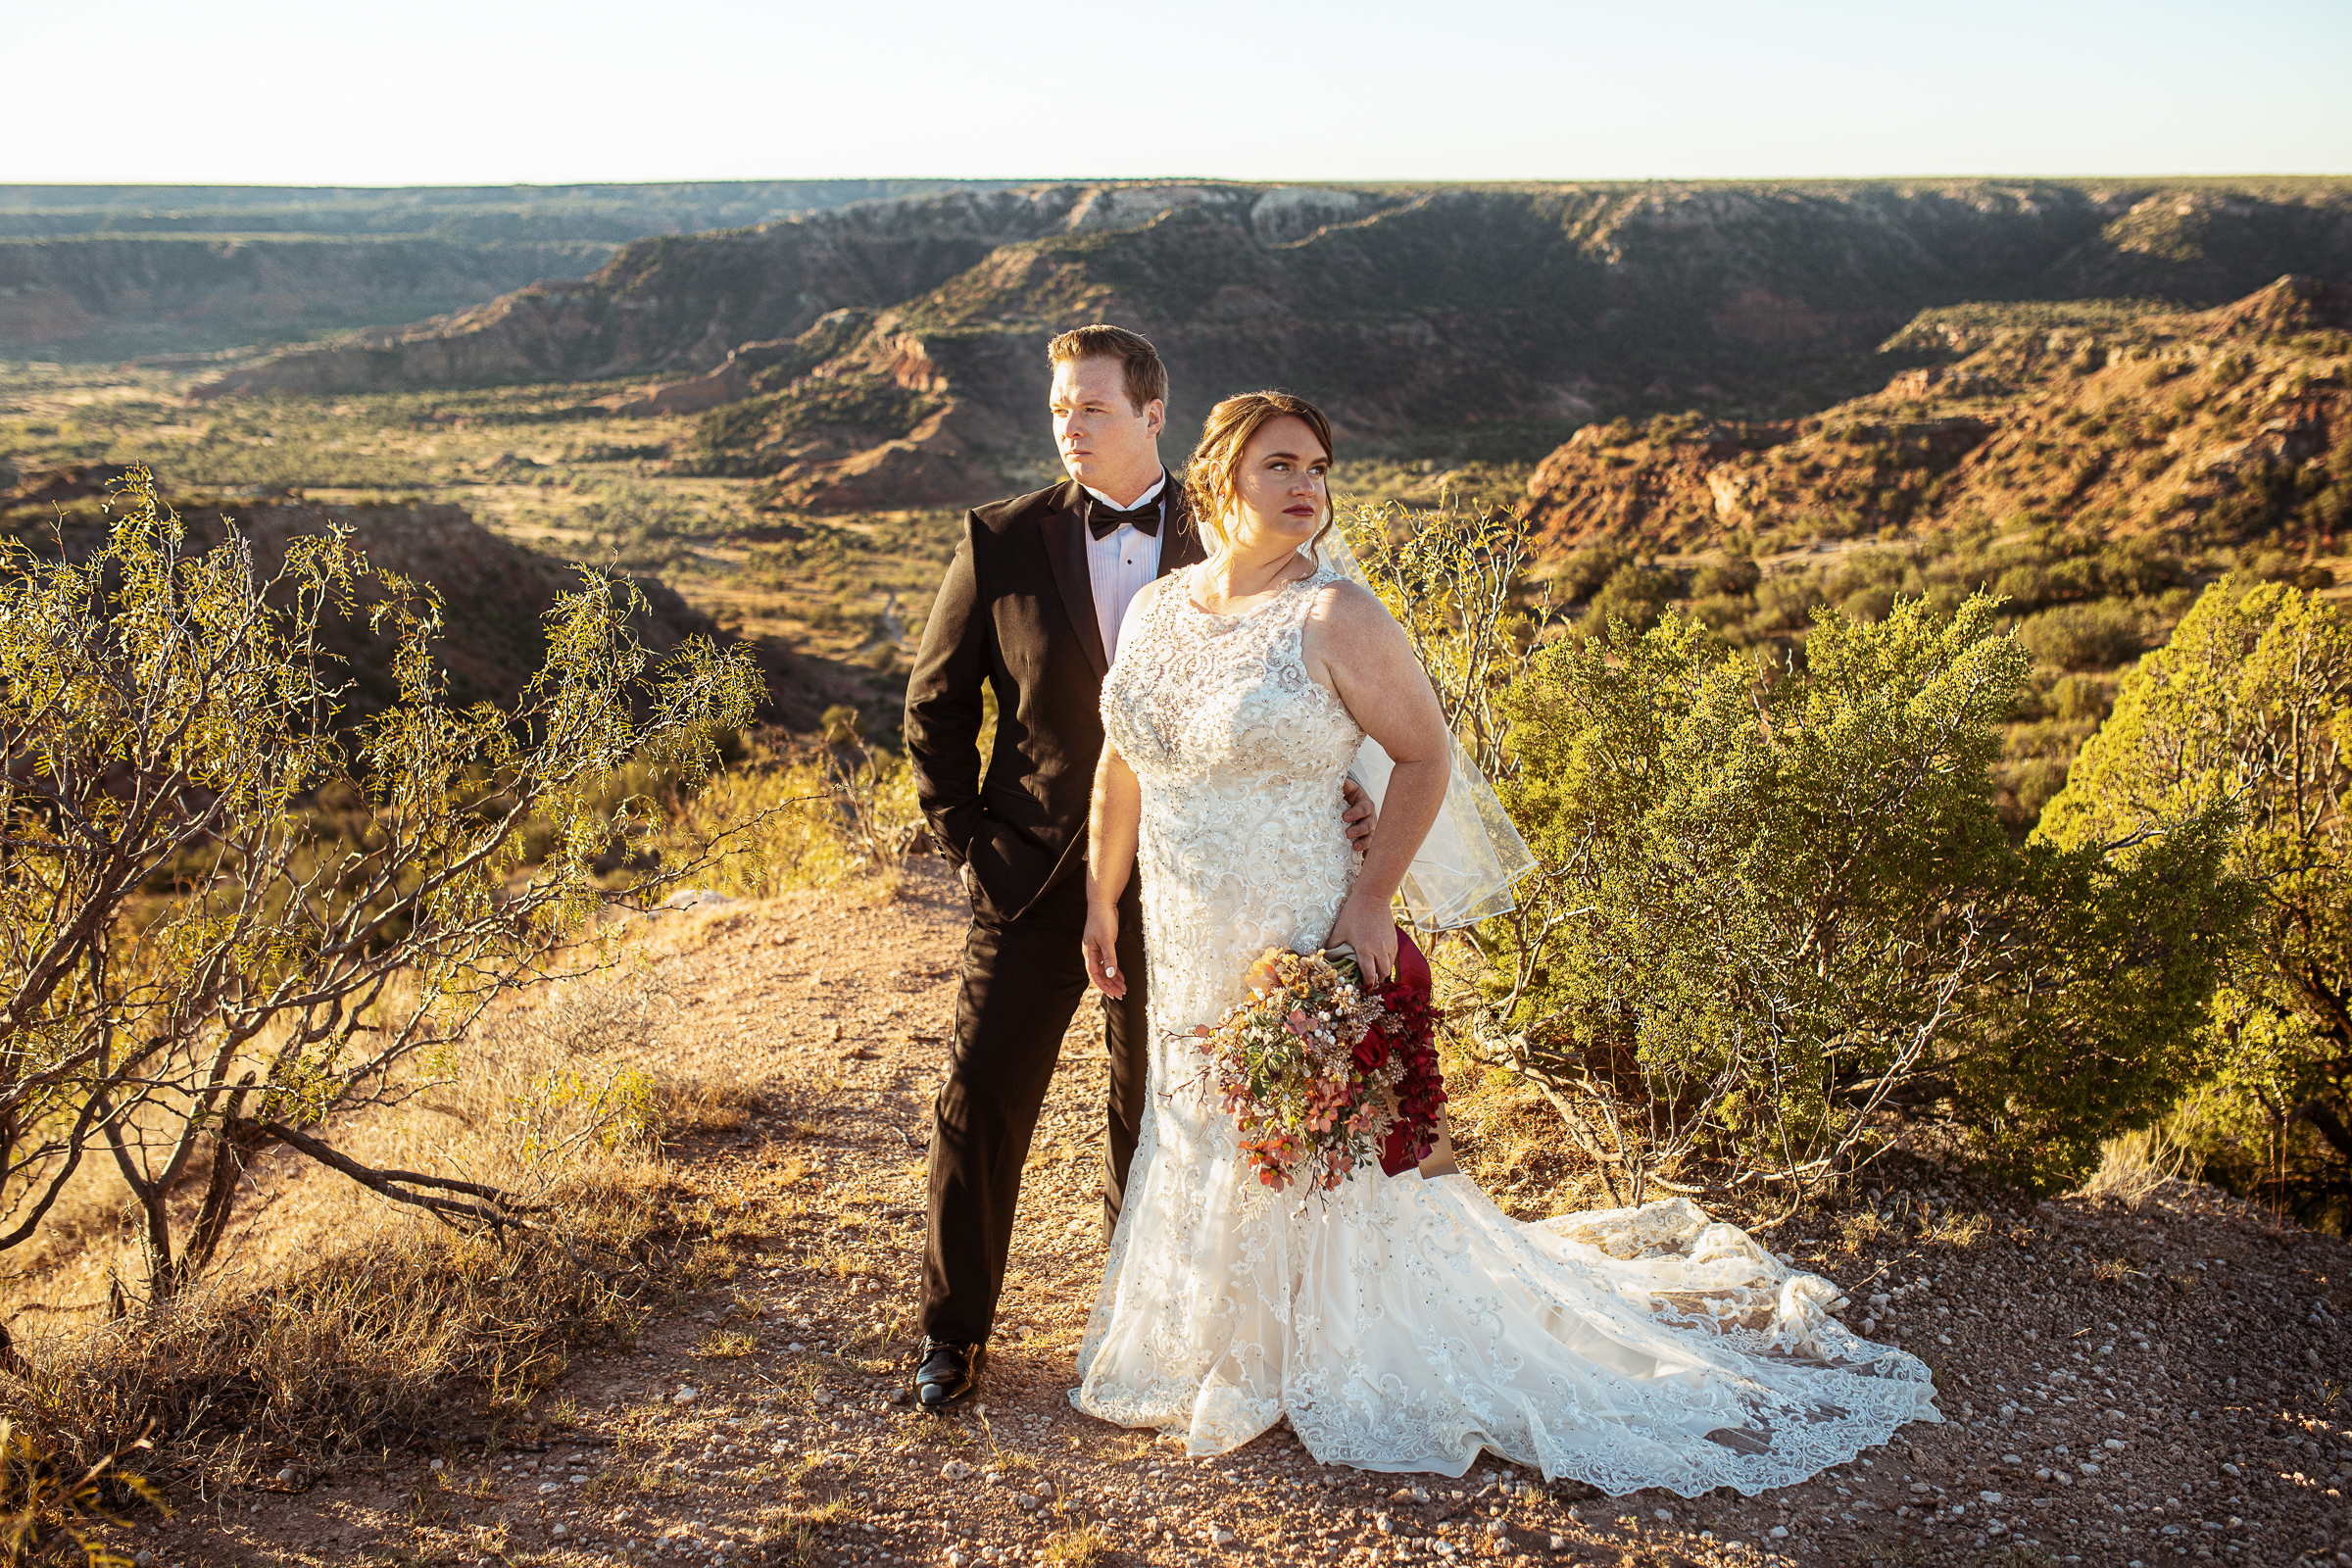 Palo Duro Elopement at Palo Duro State Park, Texas Elopements